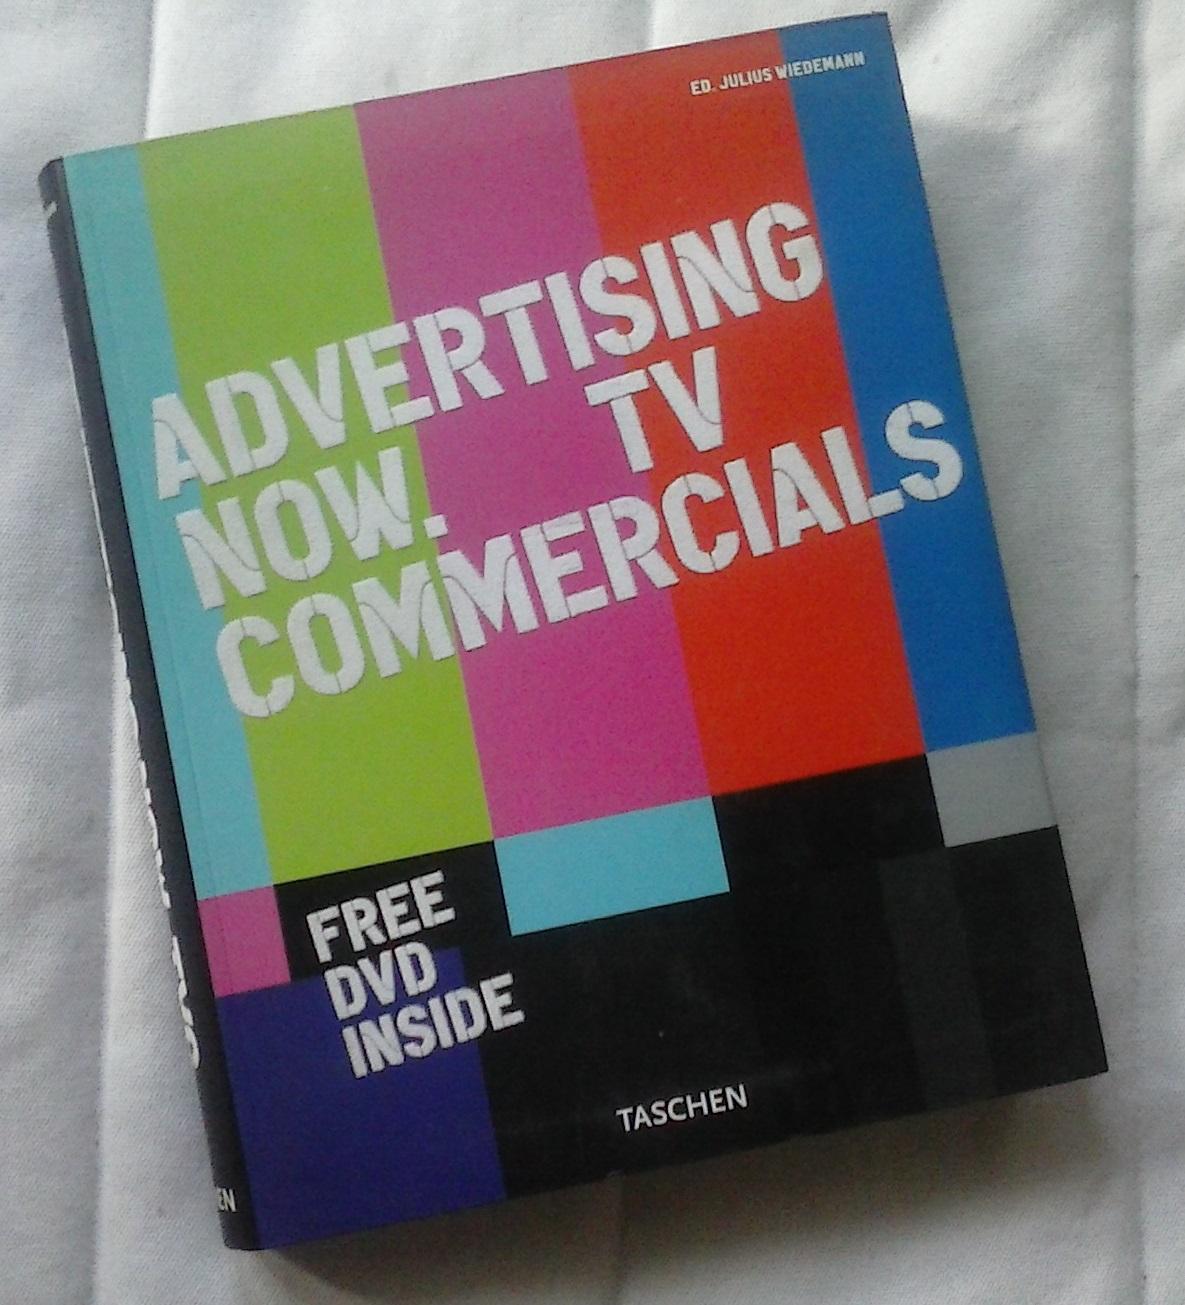 Advertising Now. TV Commercials (without the DVD) - Julius Wiedemann (ed.)